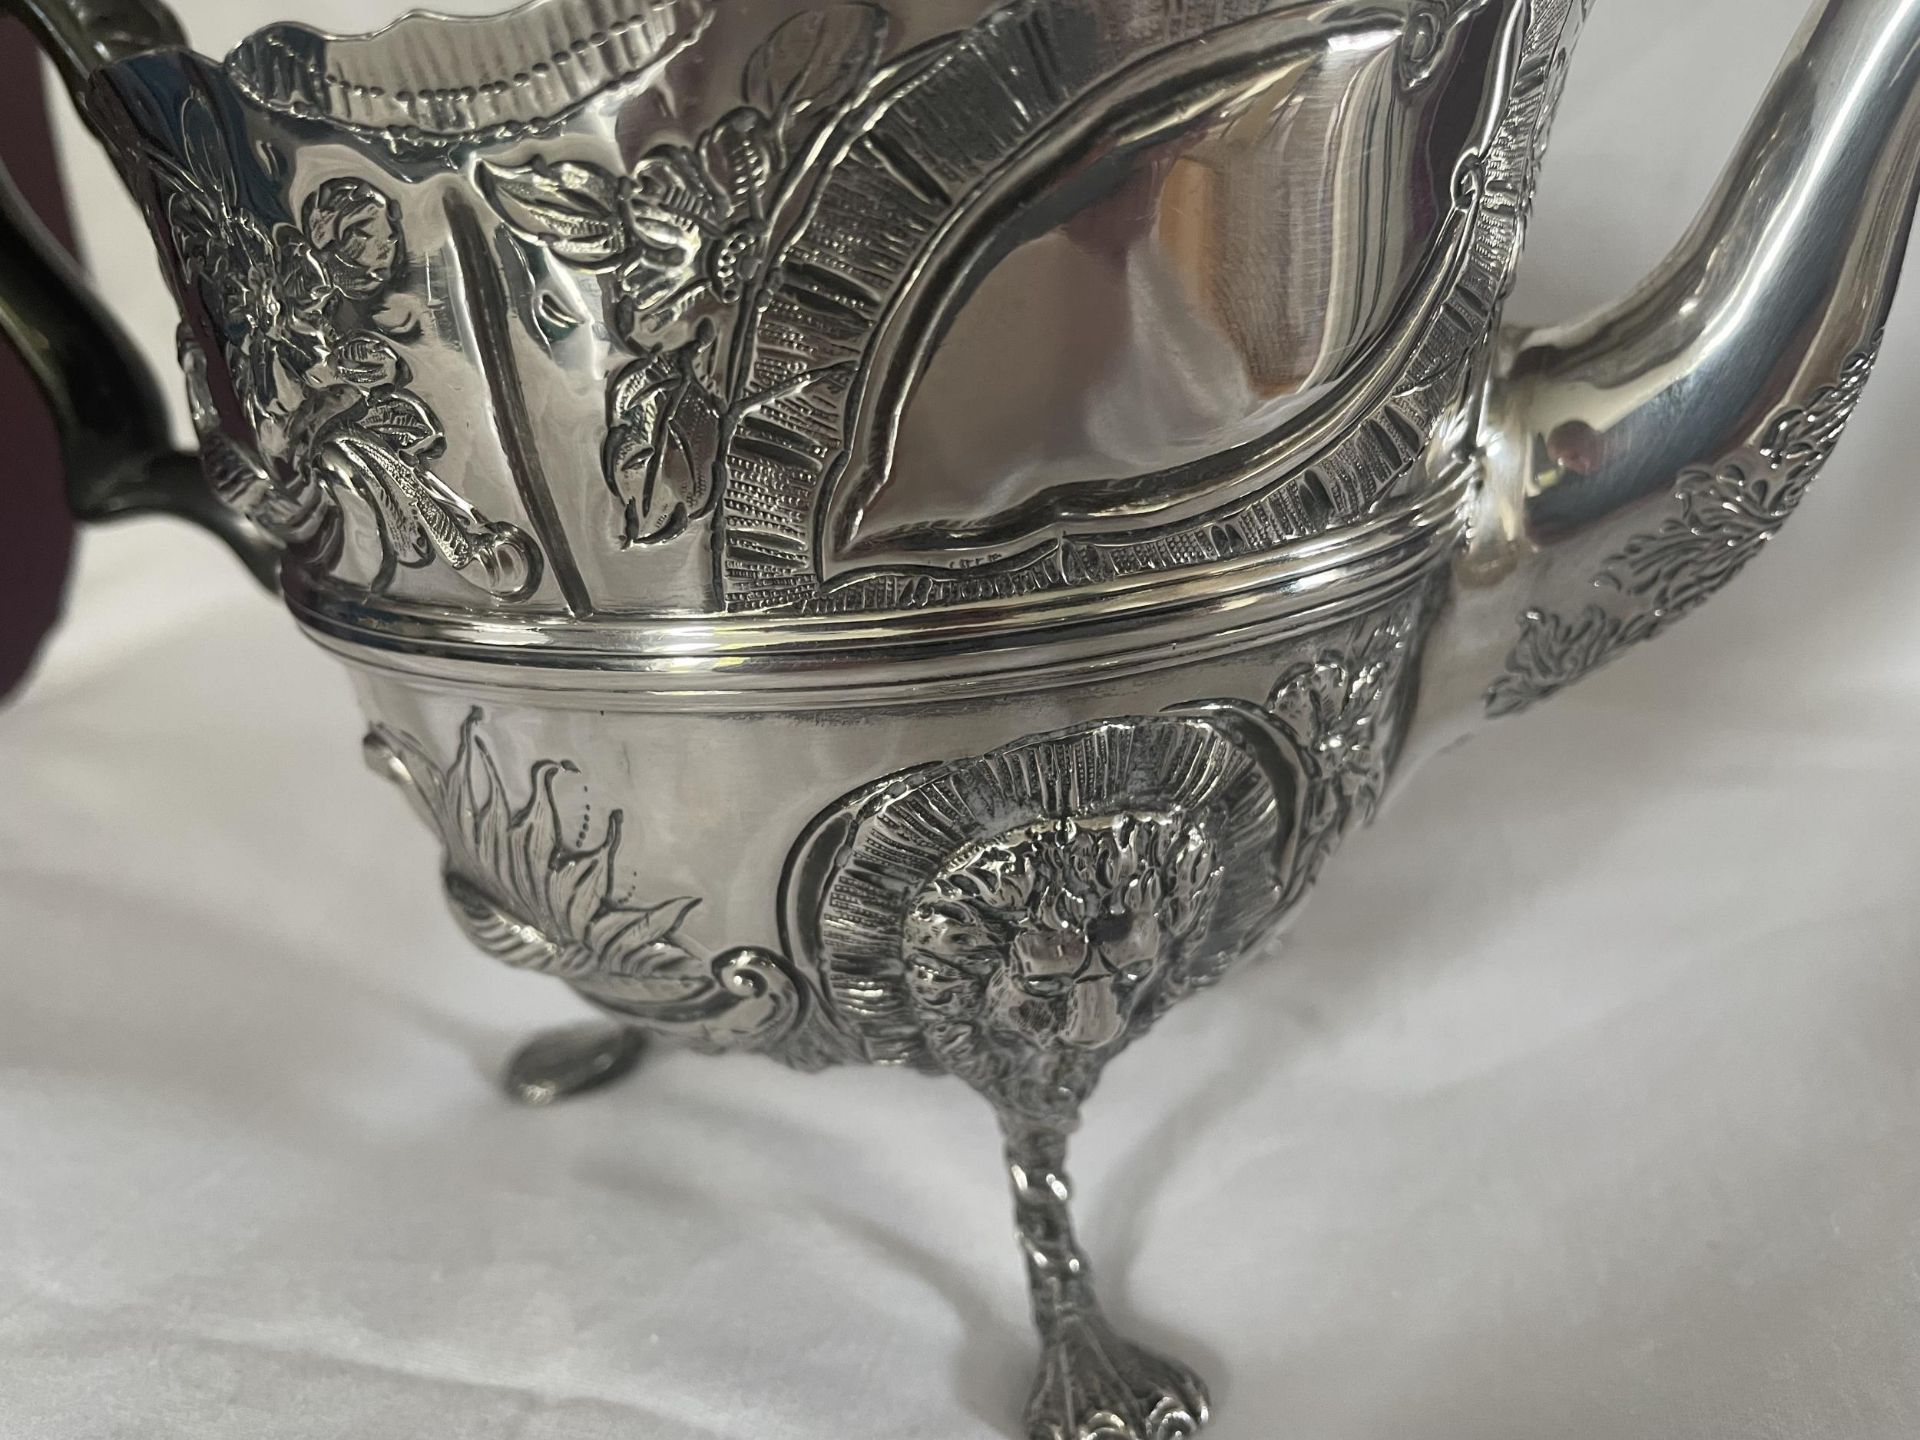 A HIGHLY DECORATIVE HALLMARKED 1892 LONDON SILVER TEAPOT, MAKER JAMES WAKELY AND FRANK CLARKE - Image 5 of 9